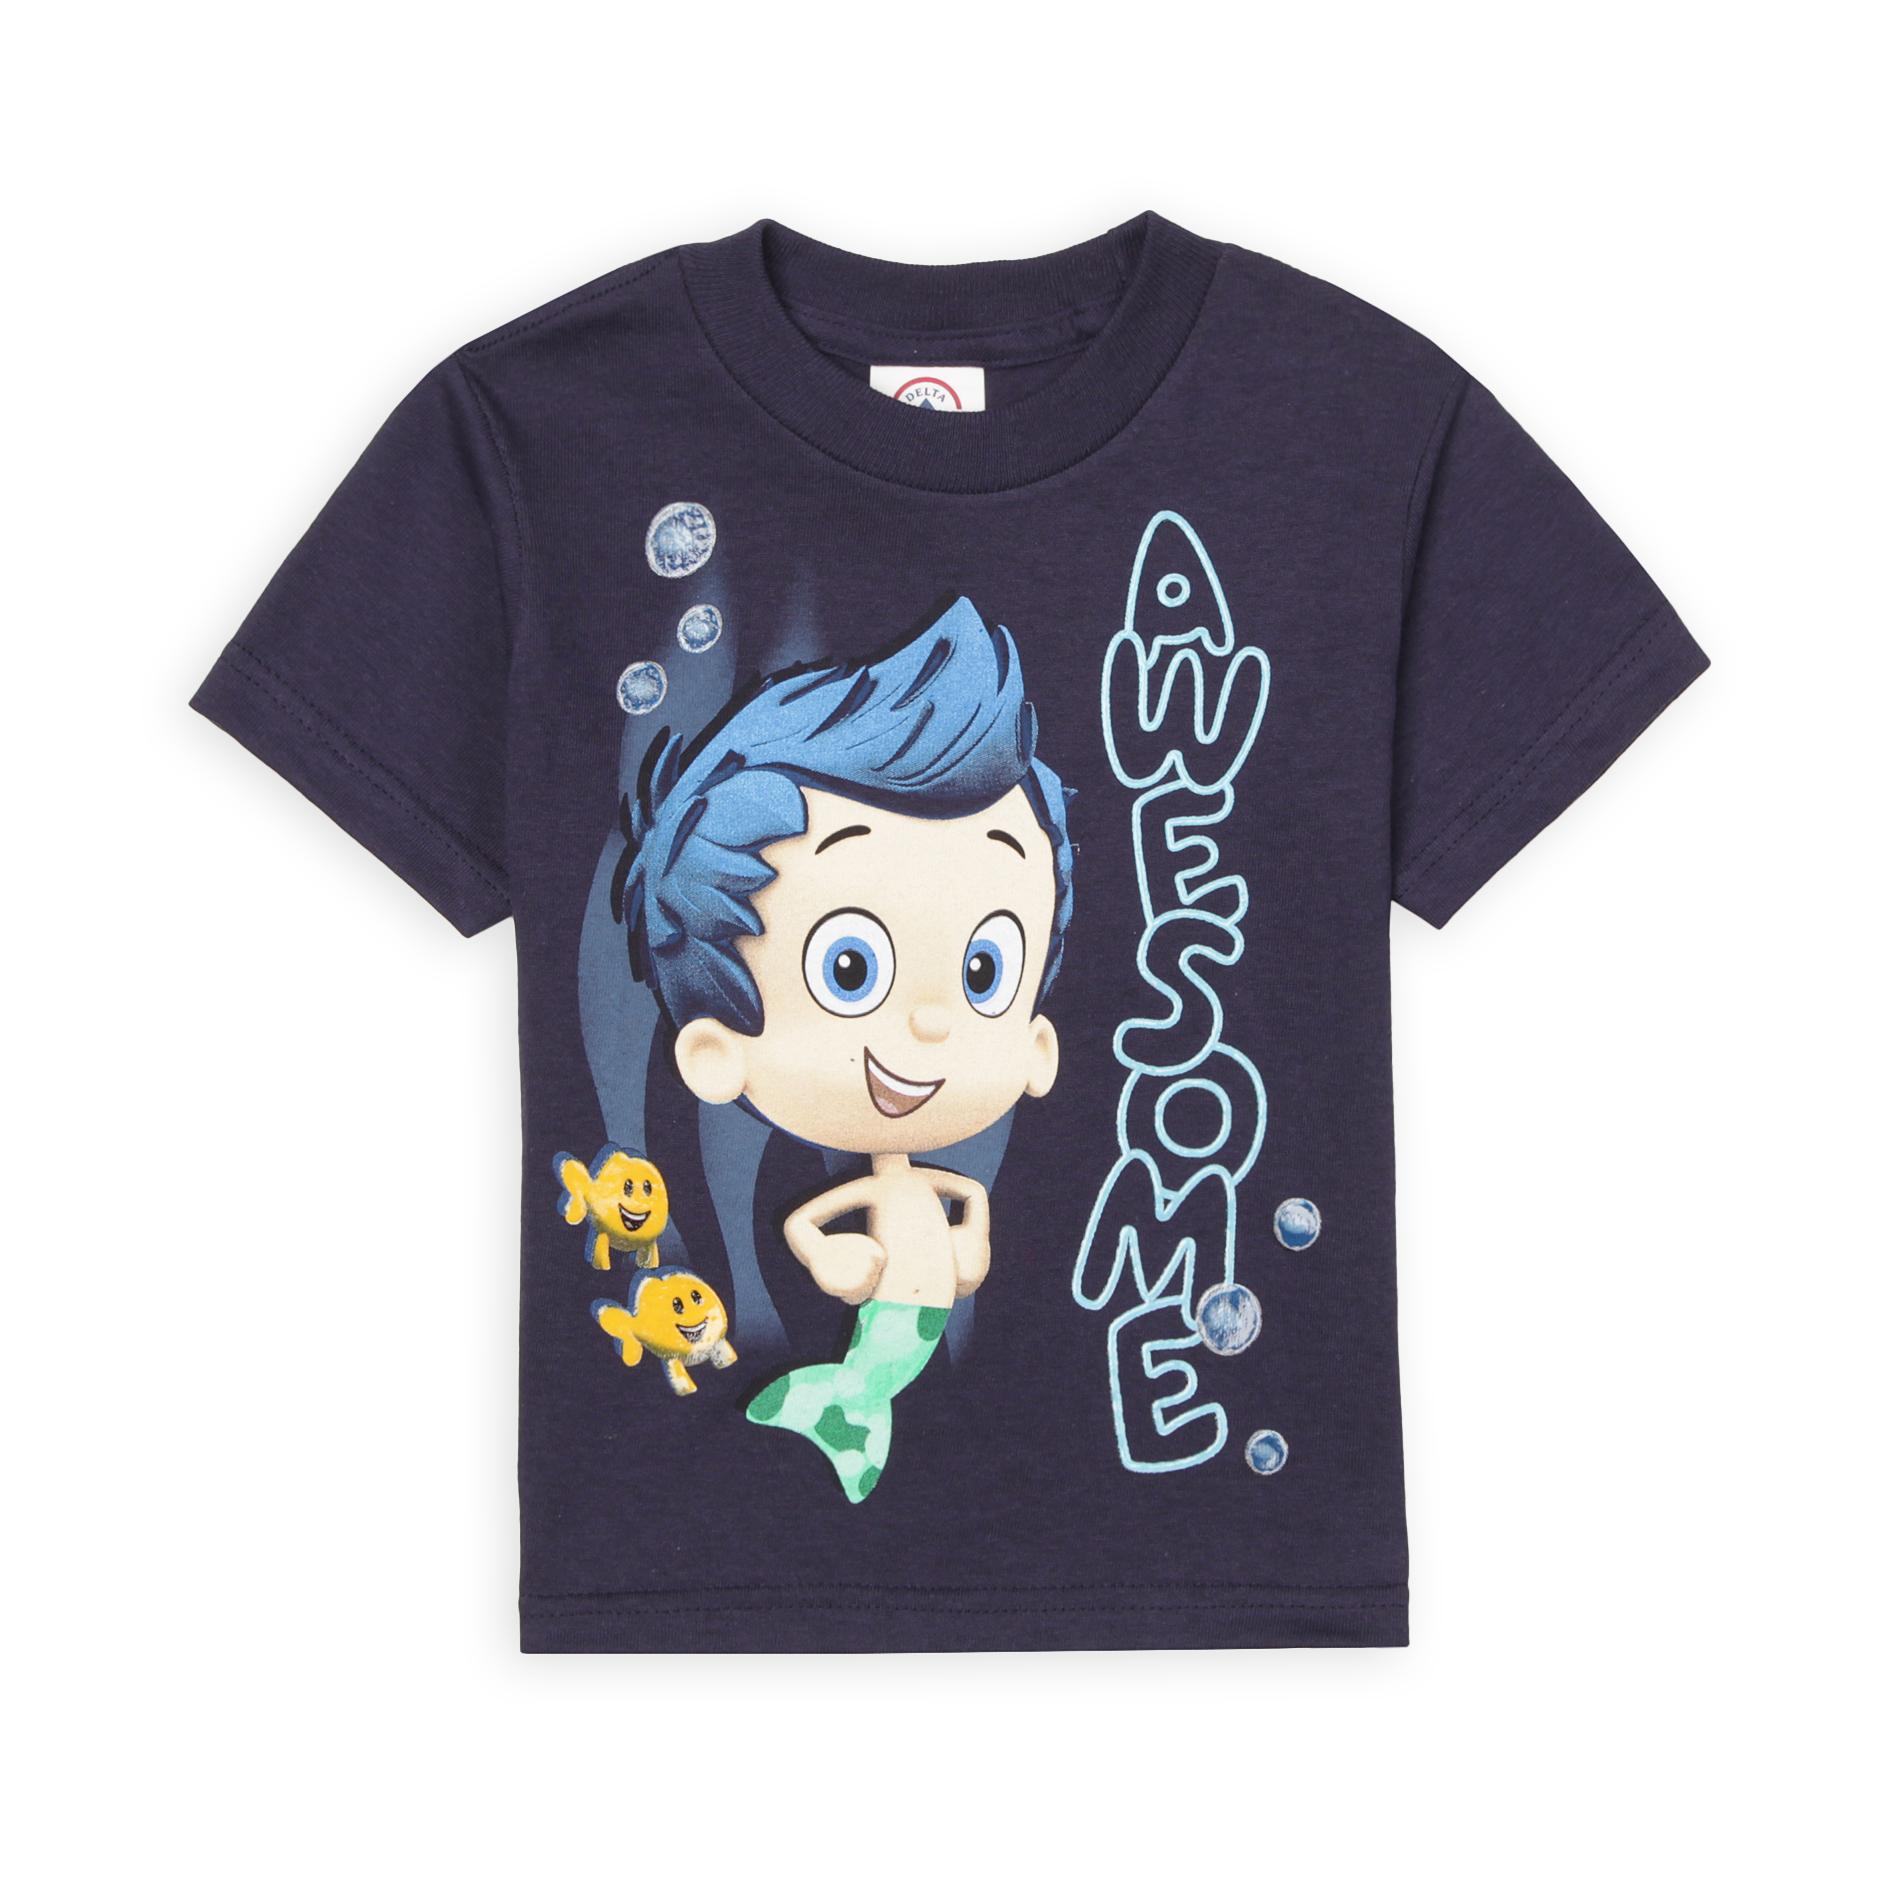 Nickelodeon Toddler Boy's Graphic T-Shirt - Bubble Guppies